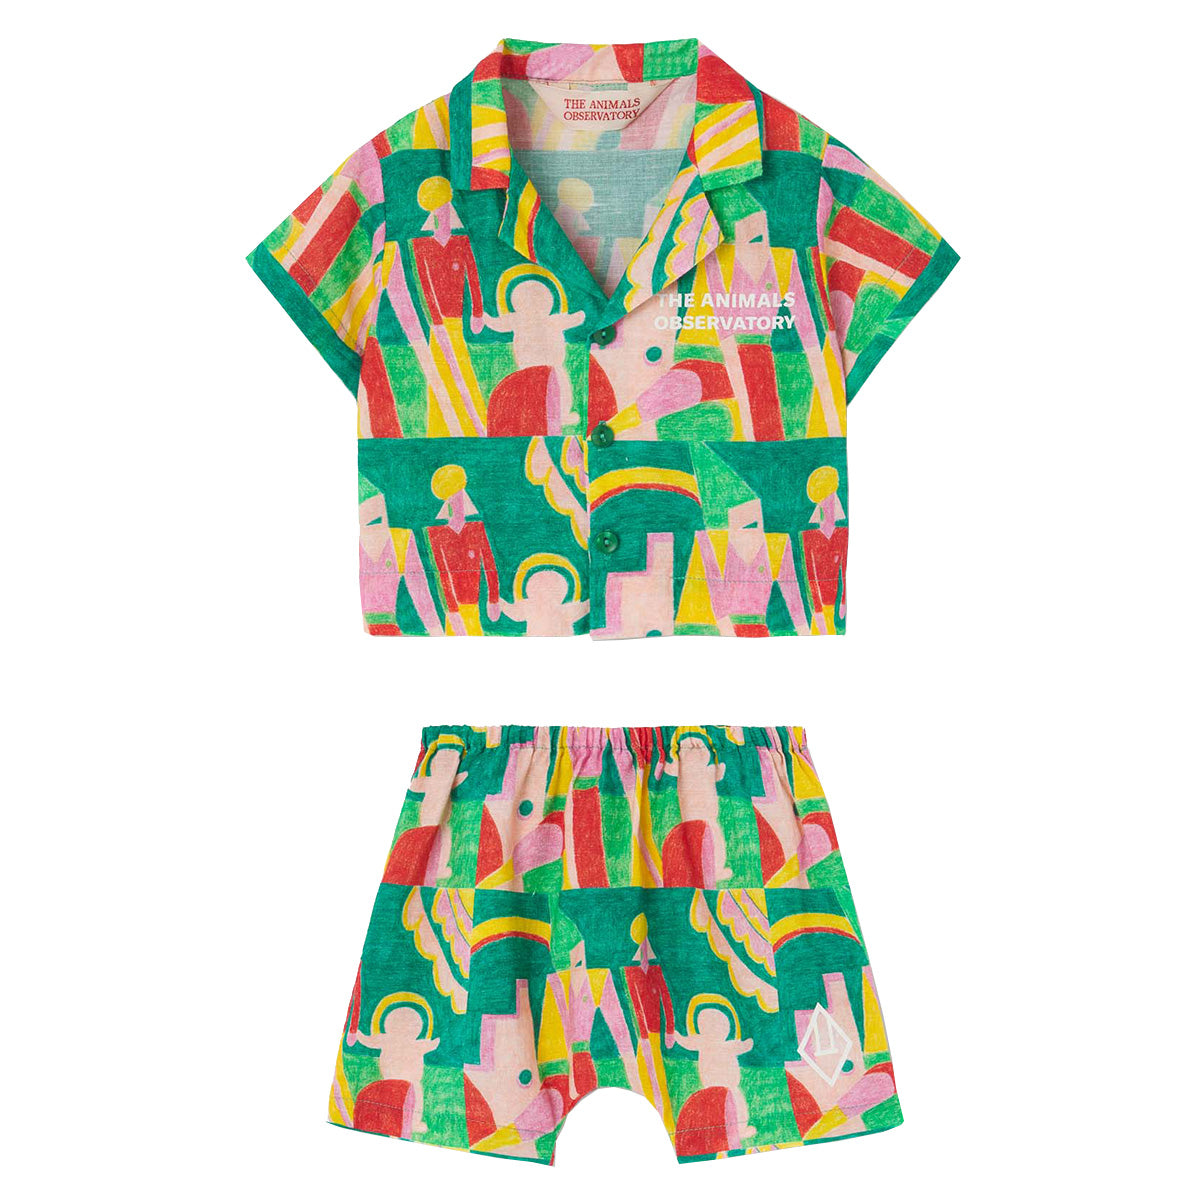 The Magpie Baby Two piece from The Animals Observatory features a buttoned shirt and some cute shorts